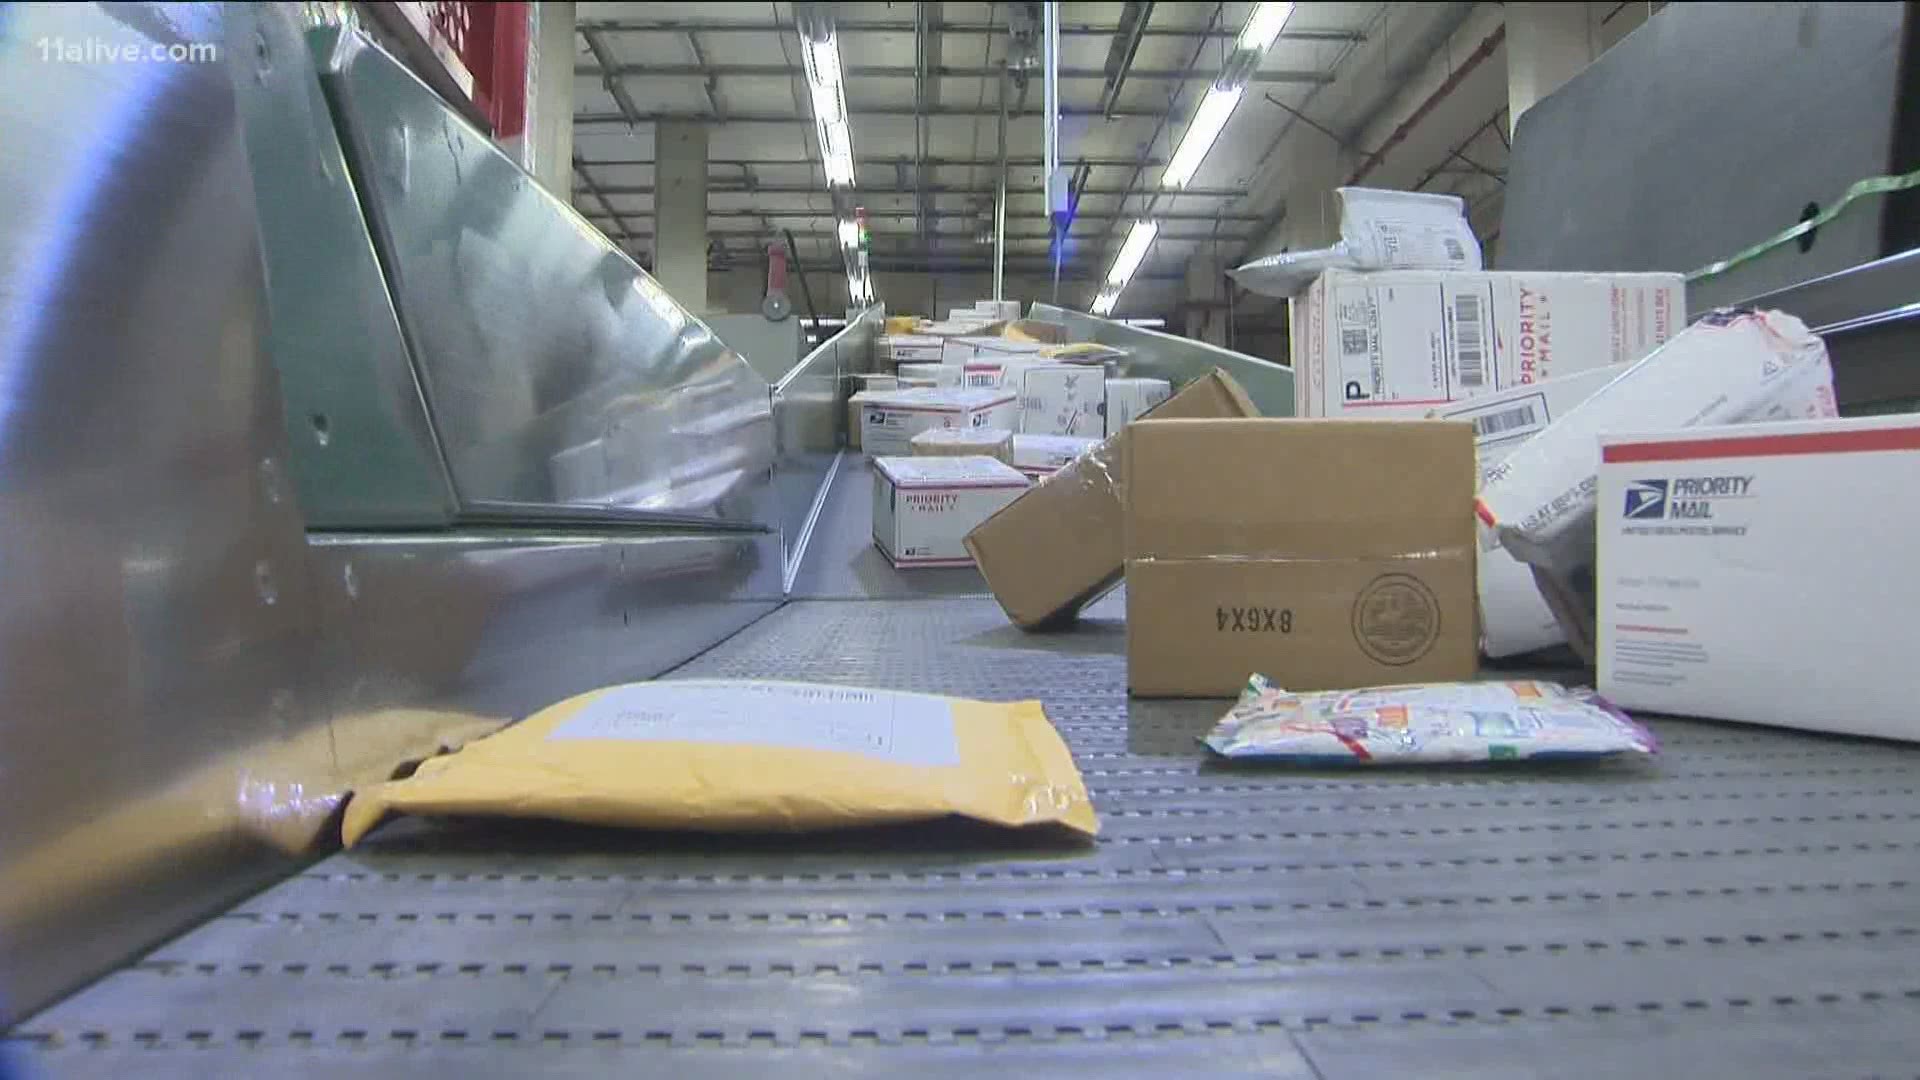 The postmaster general said he would “suspend” his initiatives until after the election “to avoid even the appearance of impact on election mail.”